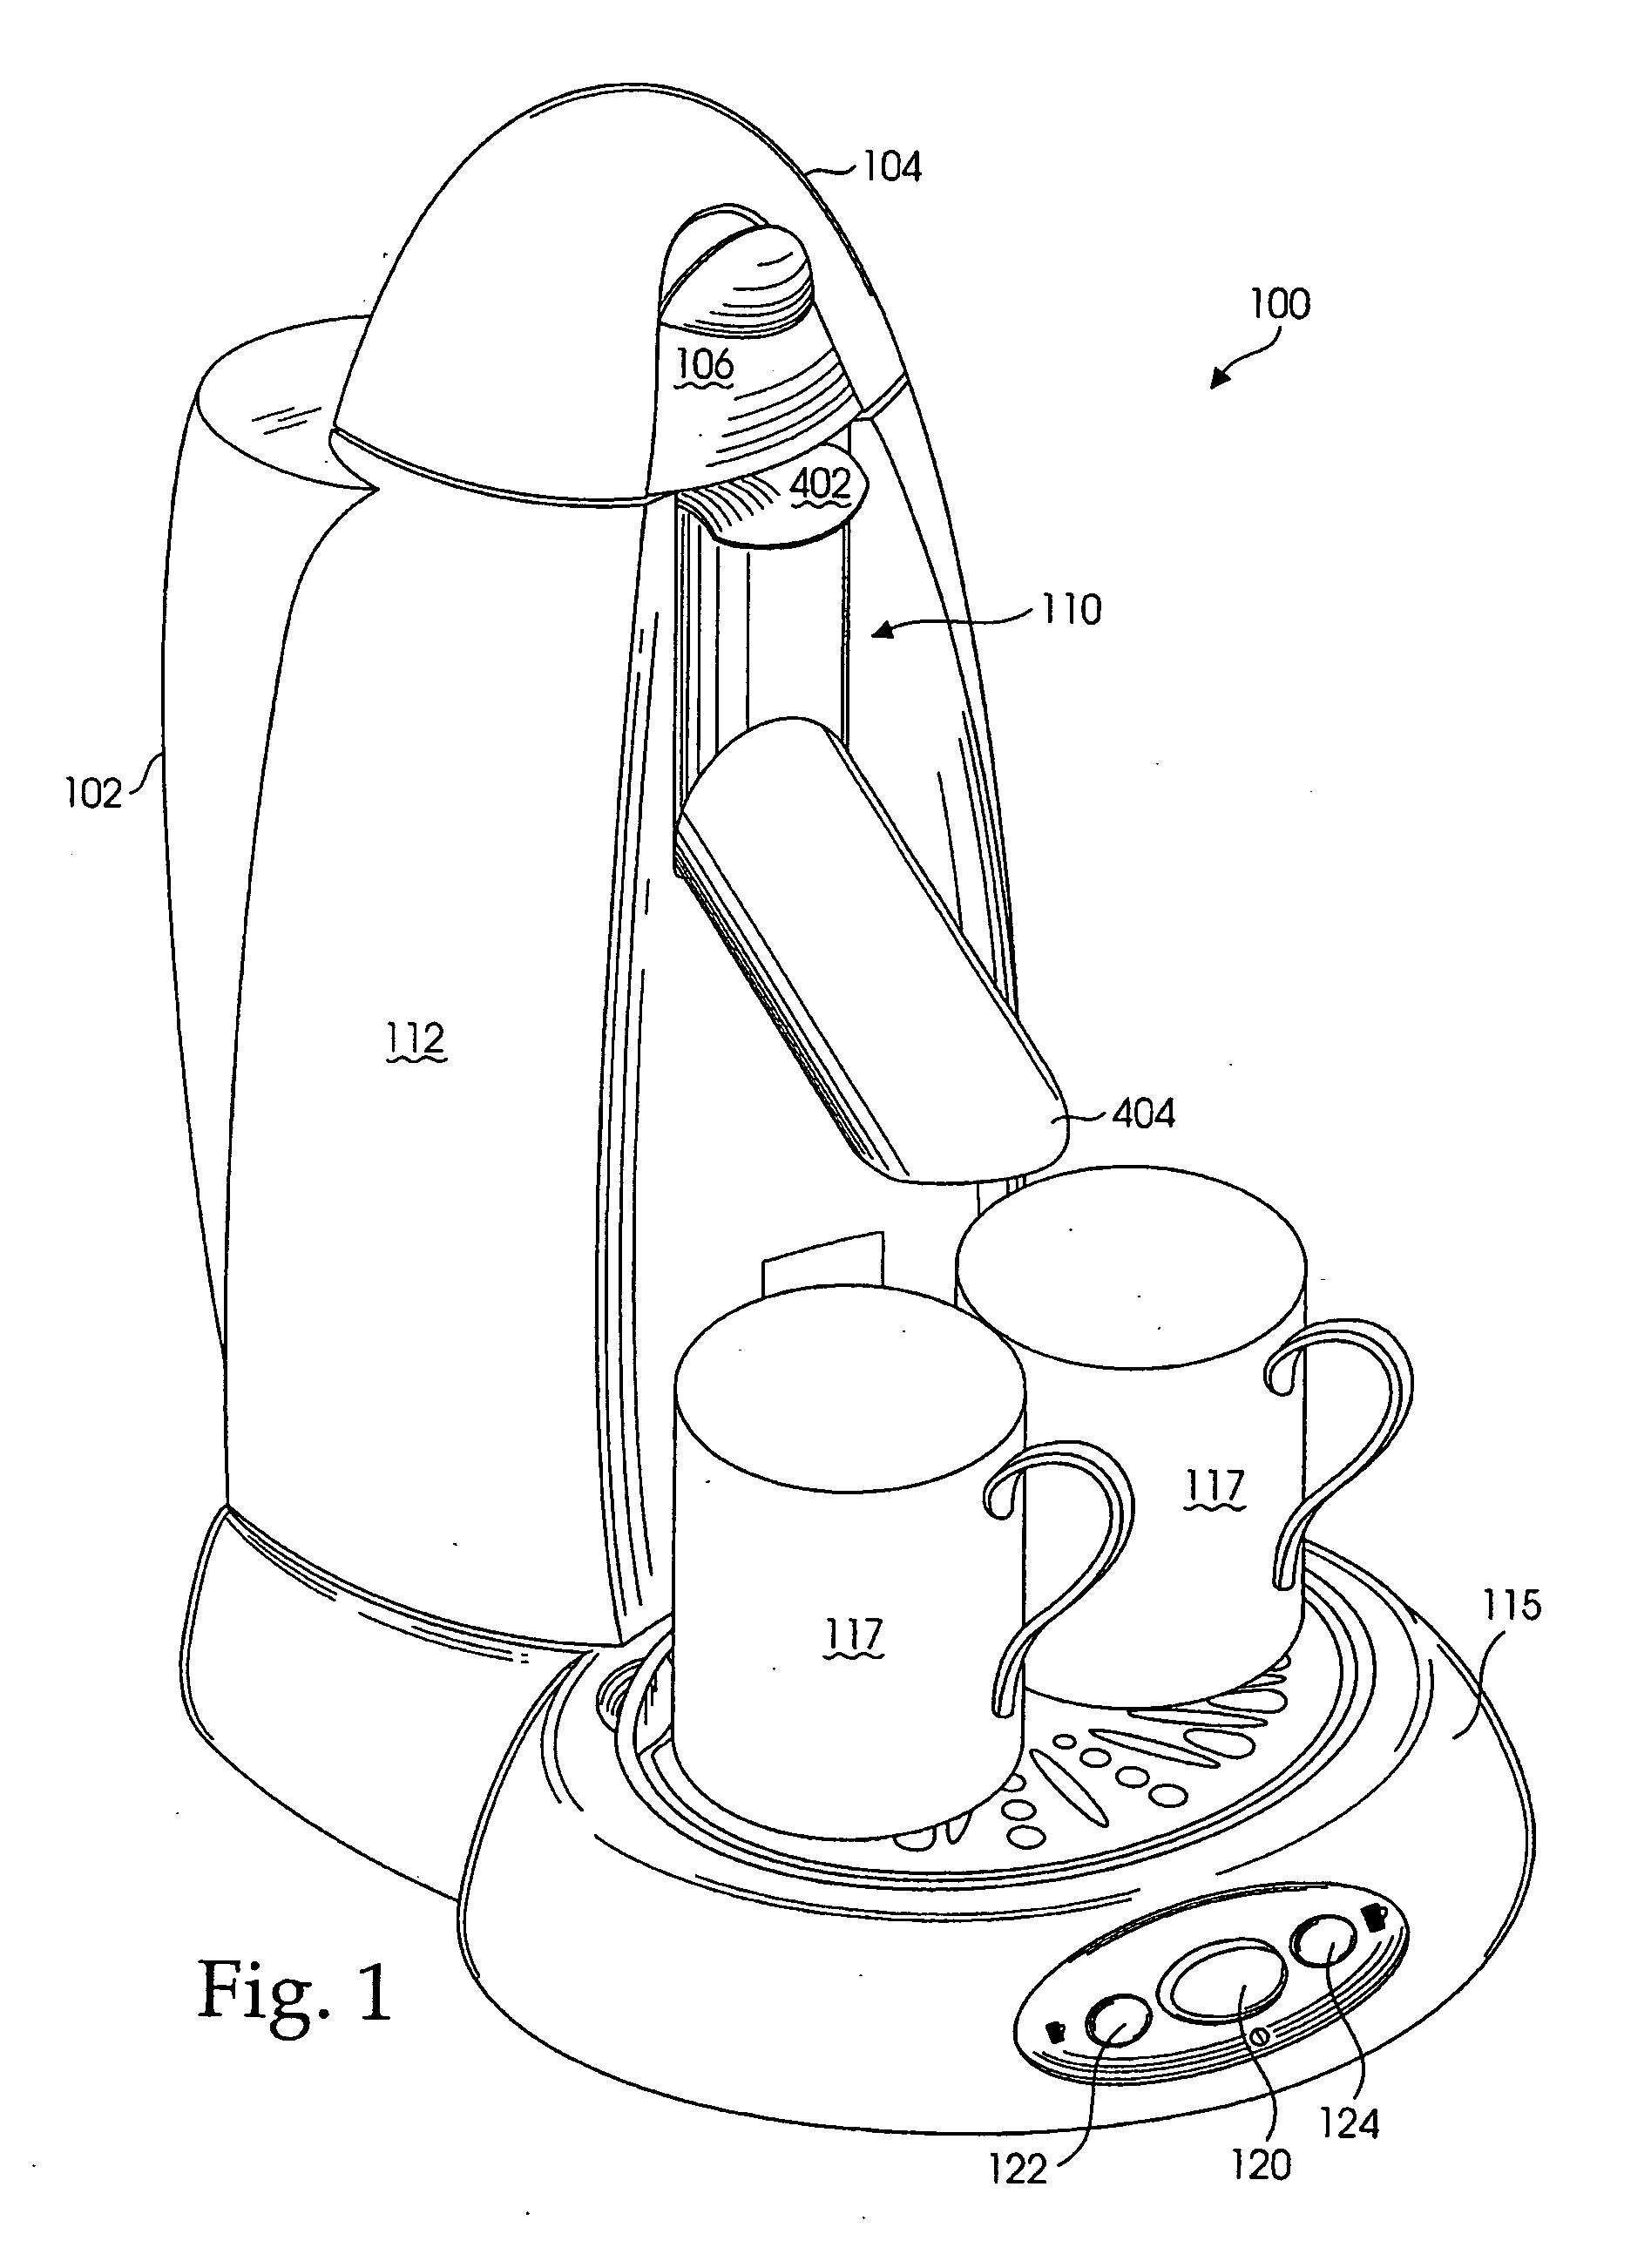 Apparatus for making brewed coffee and the like